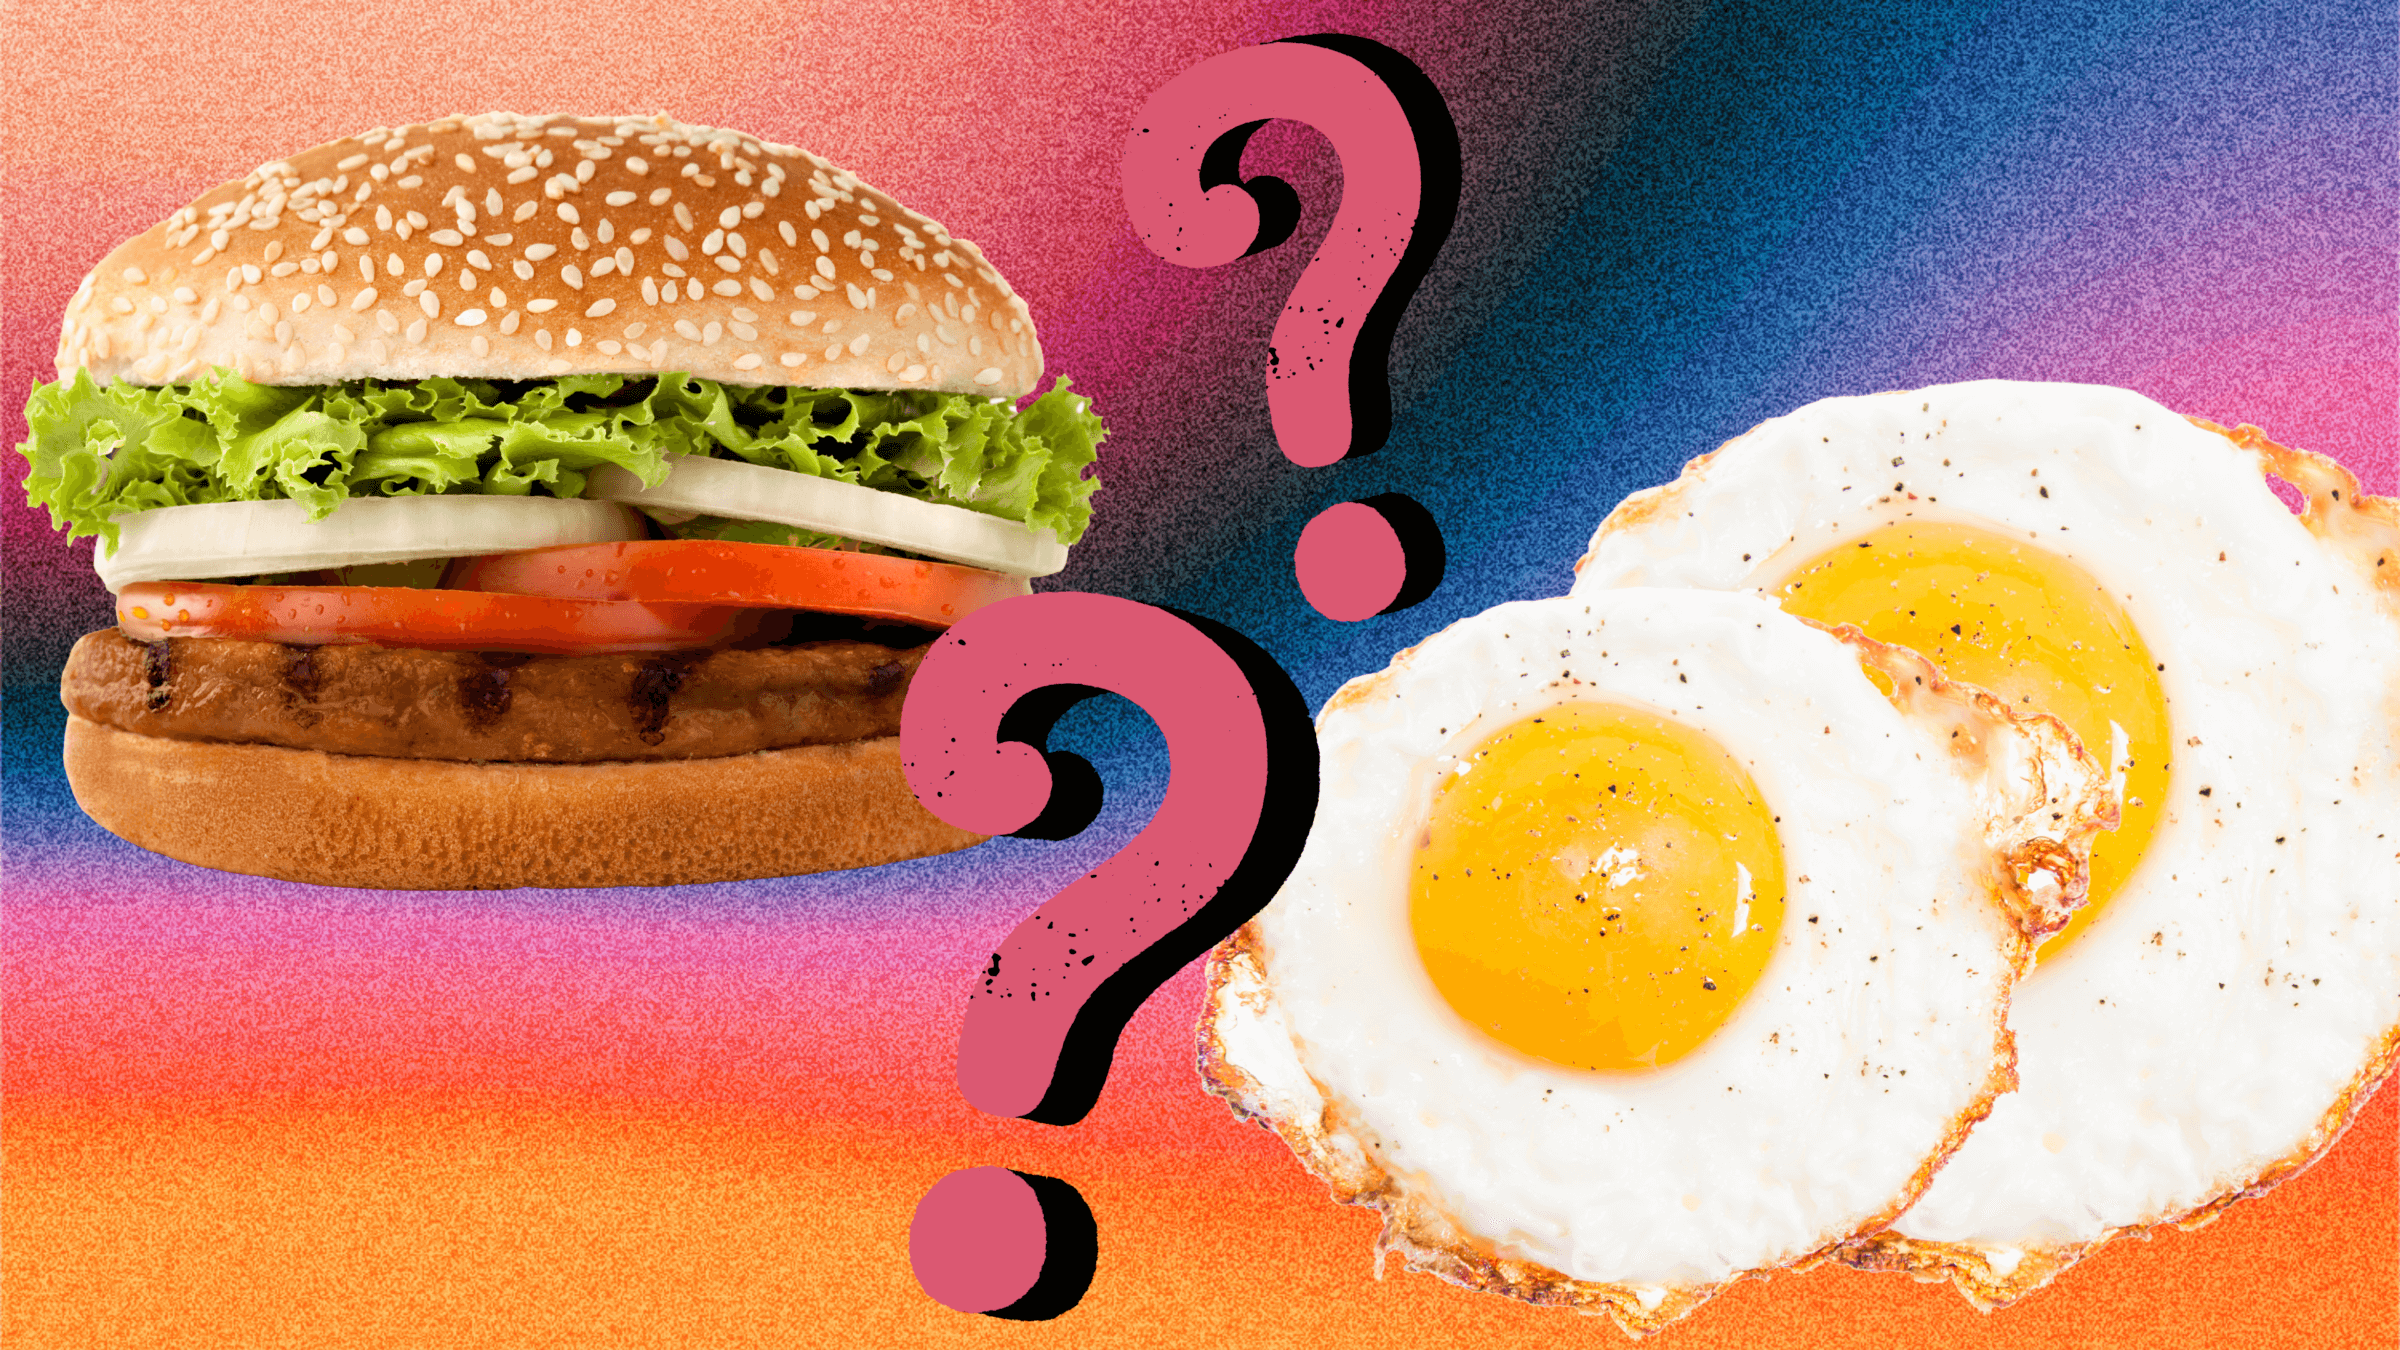 If you had the choice, which would you take, a pound of ground beef or a dozen eggs?